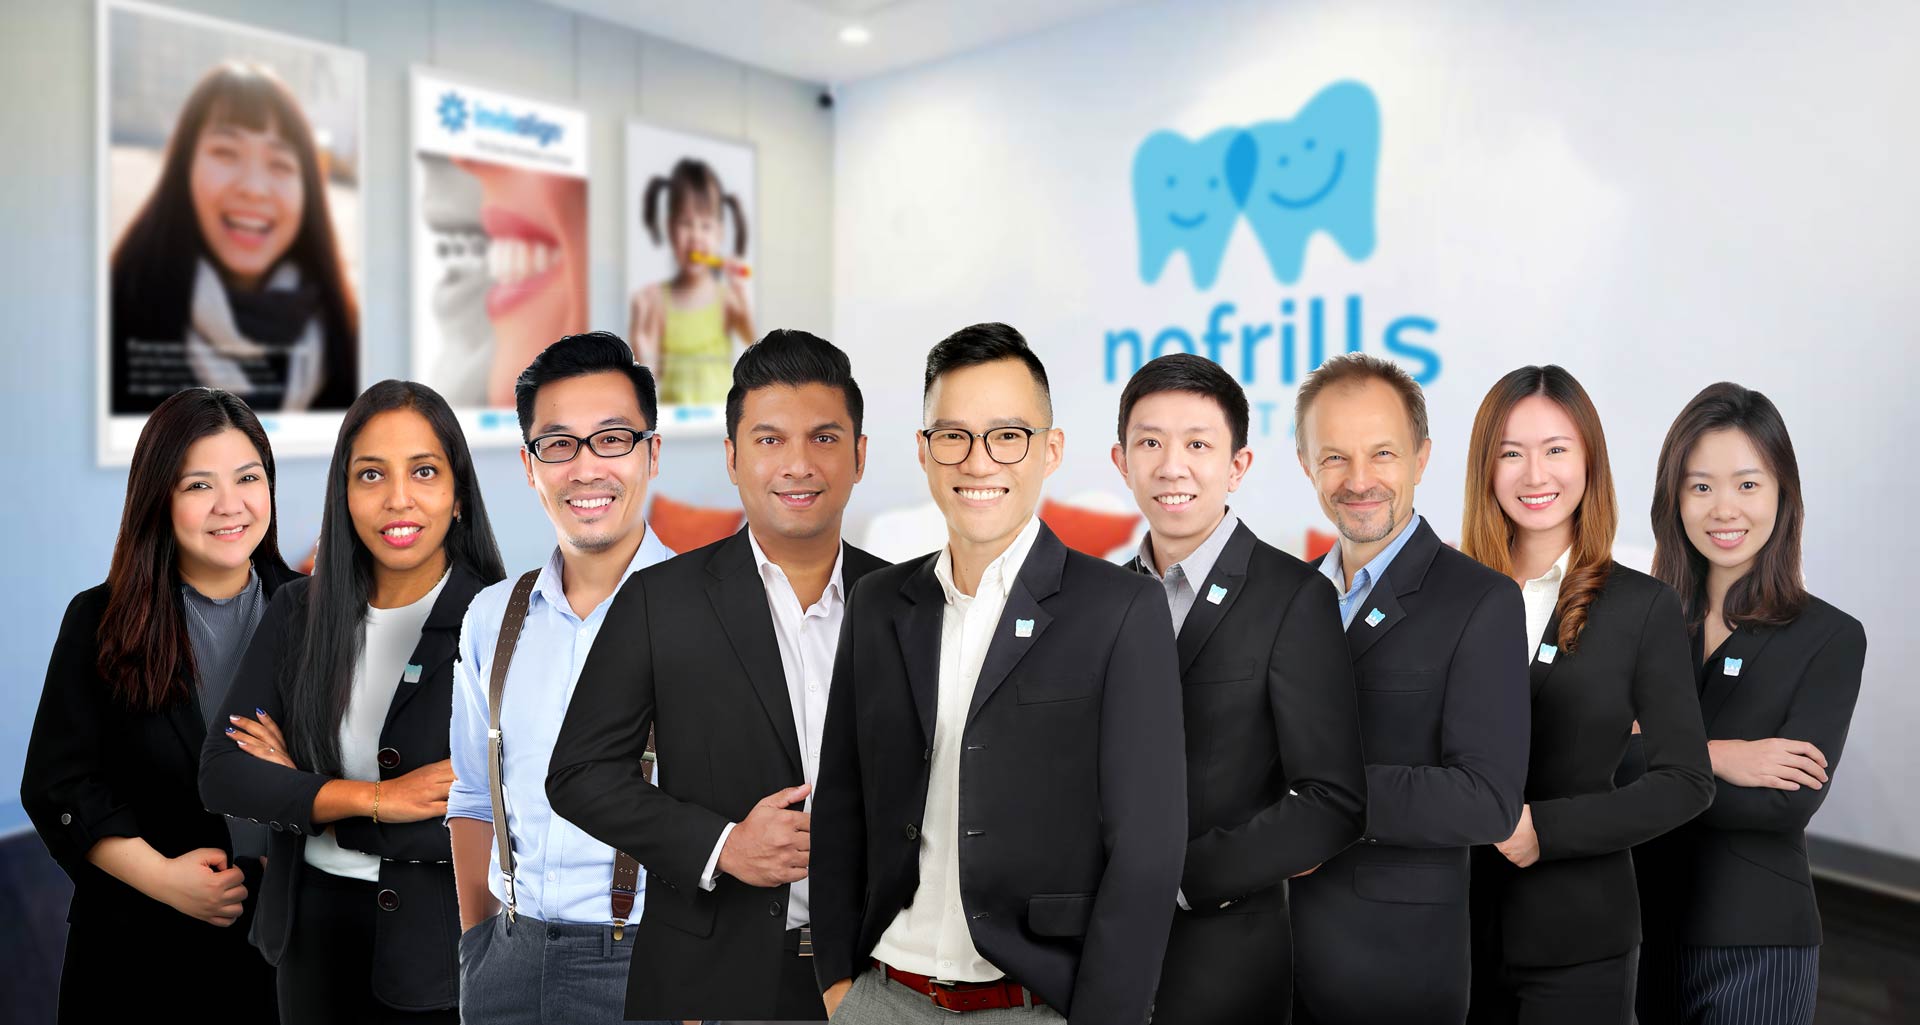 NoFrills Dental Team of Professionals | Professional Team of Dentists in Singapore